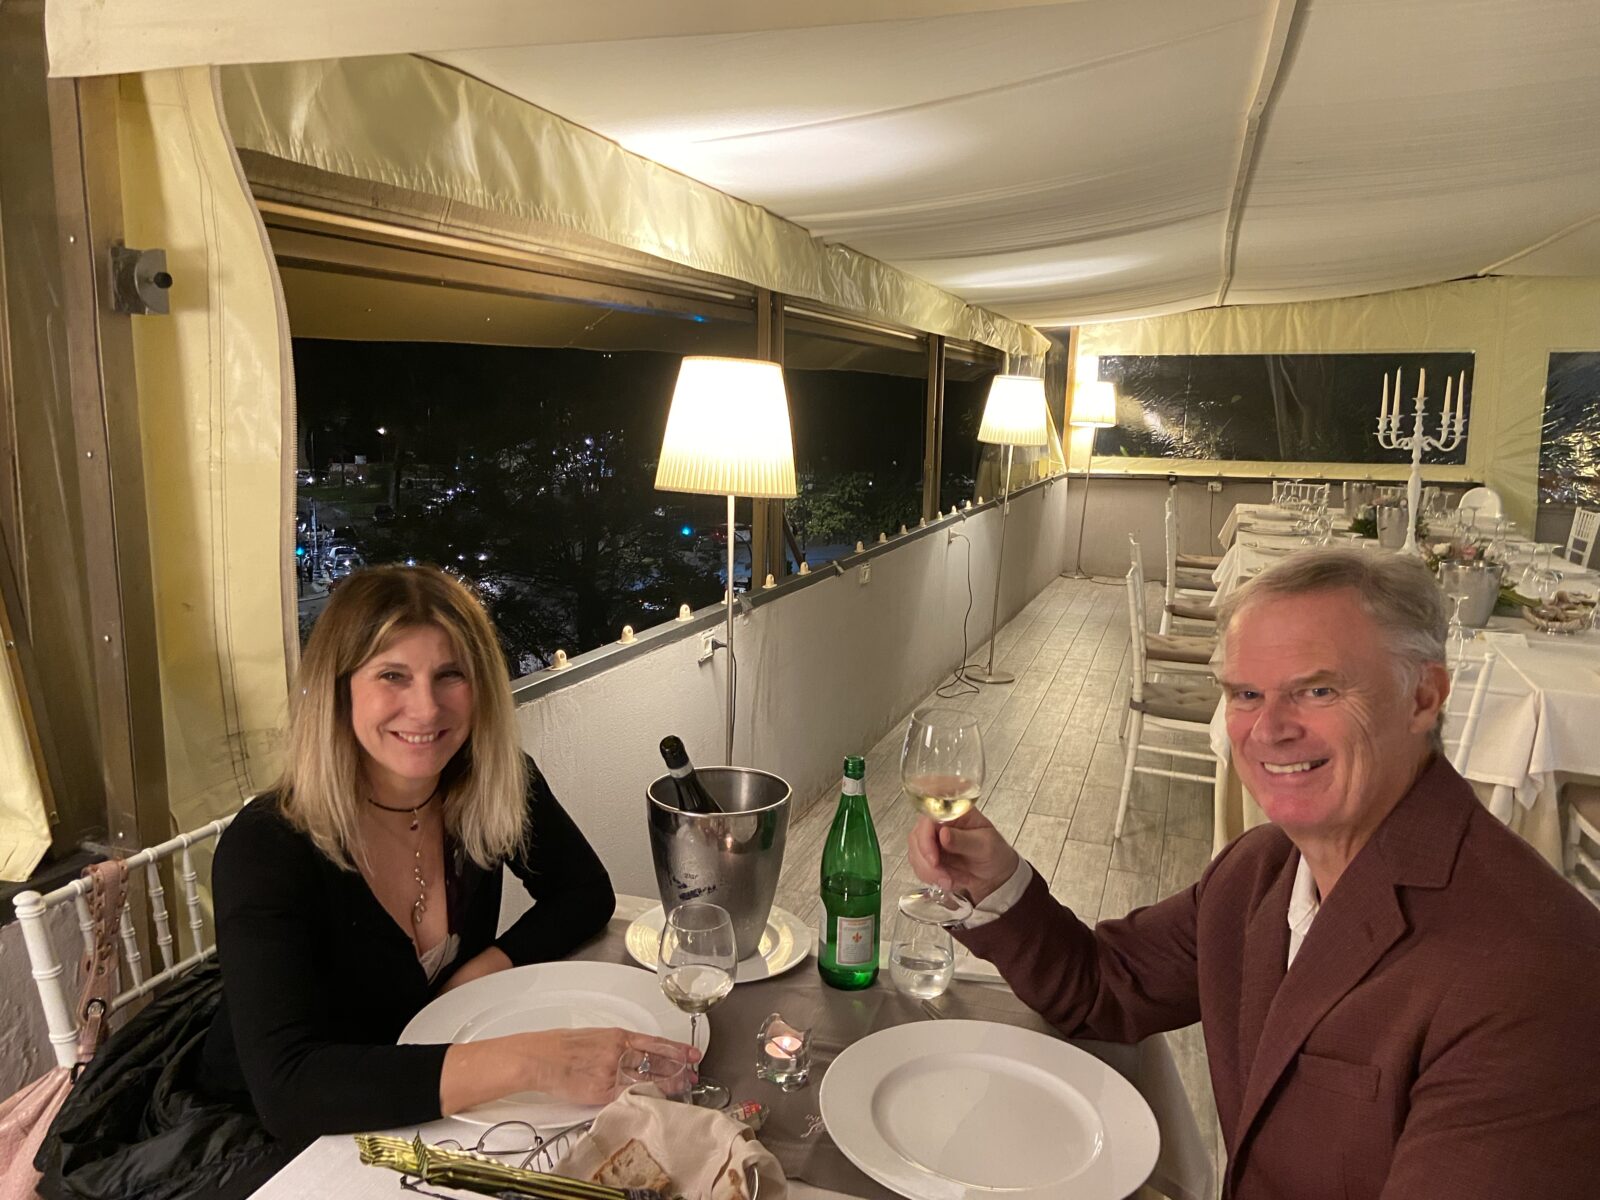 Marina and I dined at Consolini extra early Saturday night to avoid the crowd as Covid numbers climb in Rome.